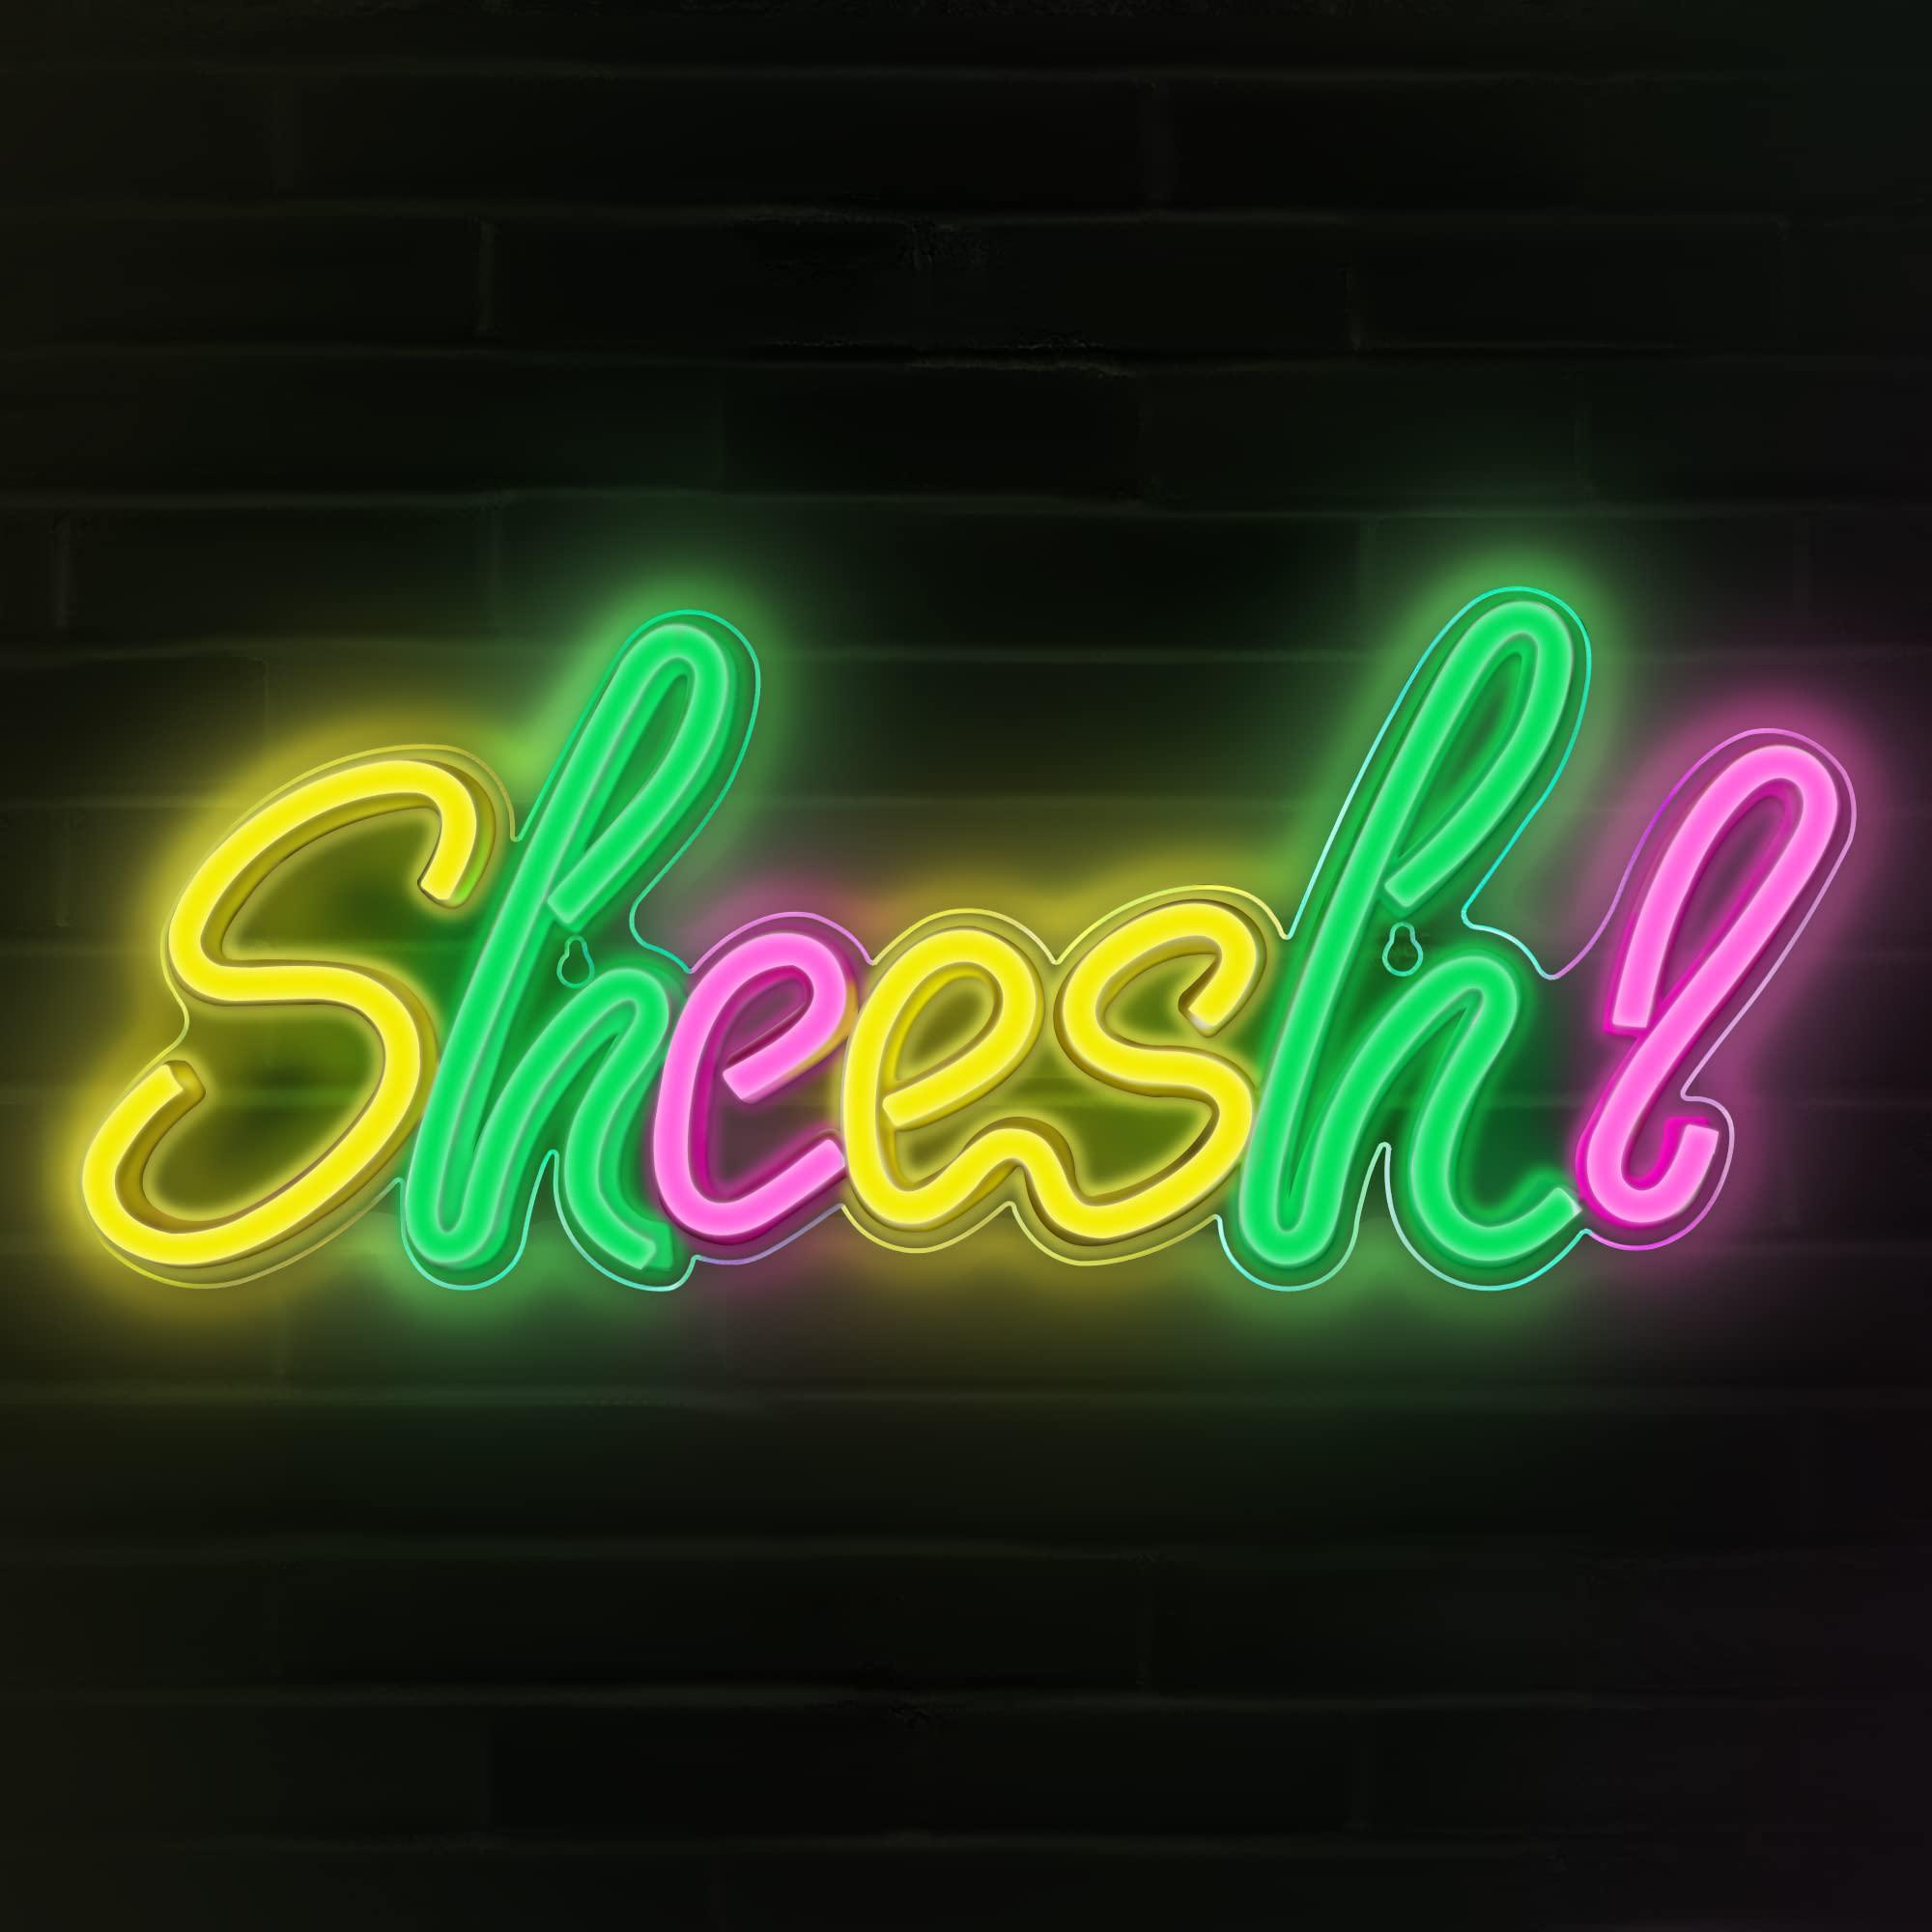 lumoonosity sheesh neon sign - meme sheesh led neon lights for gamers/streamers/influencers - cool sheesh led signs with on/o